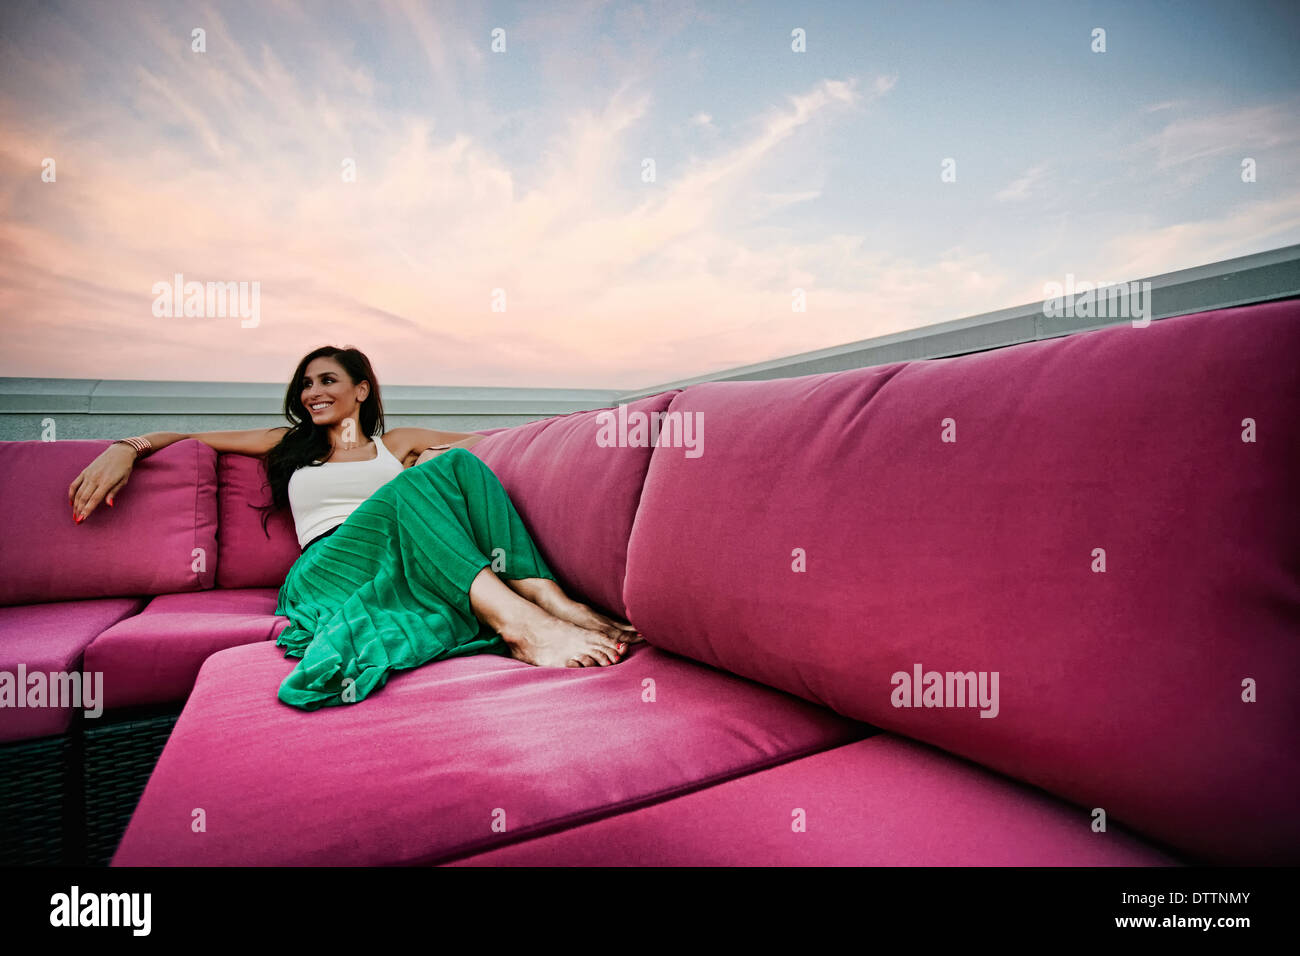 Middle Eastern woman relaxing on sofa outdoors Stock Photo